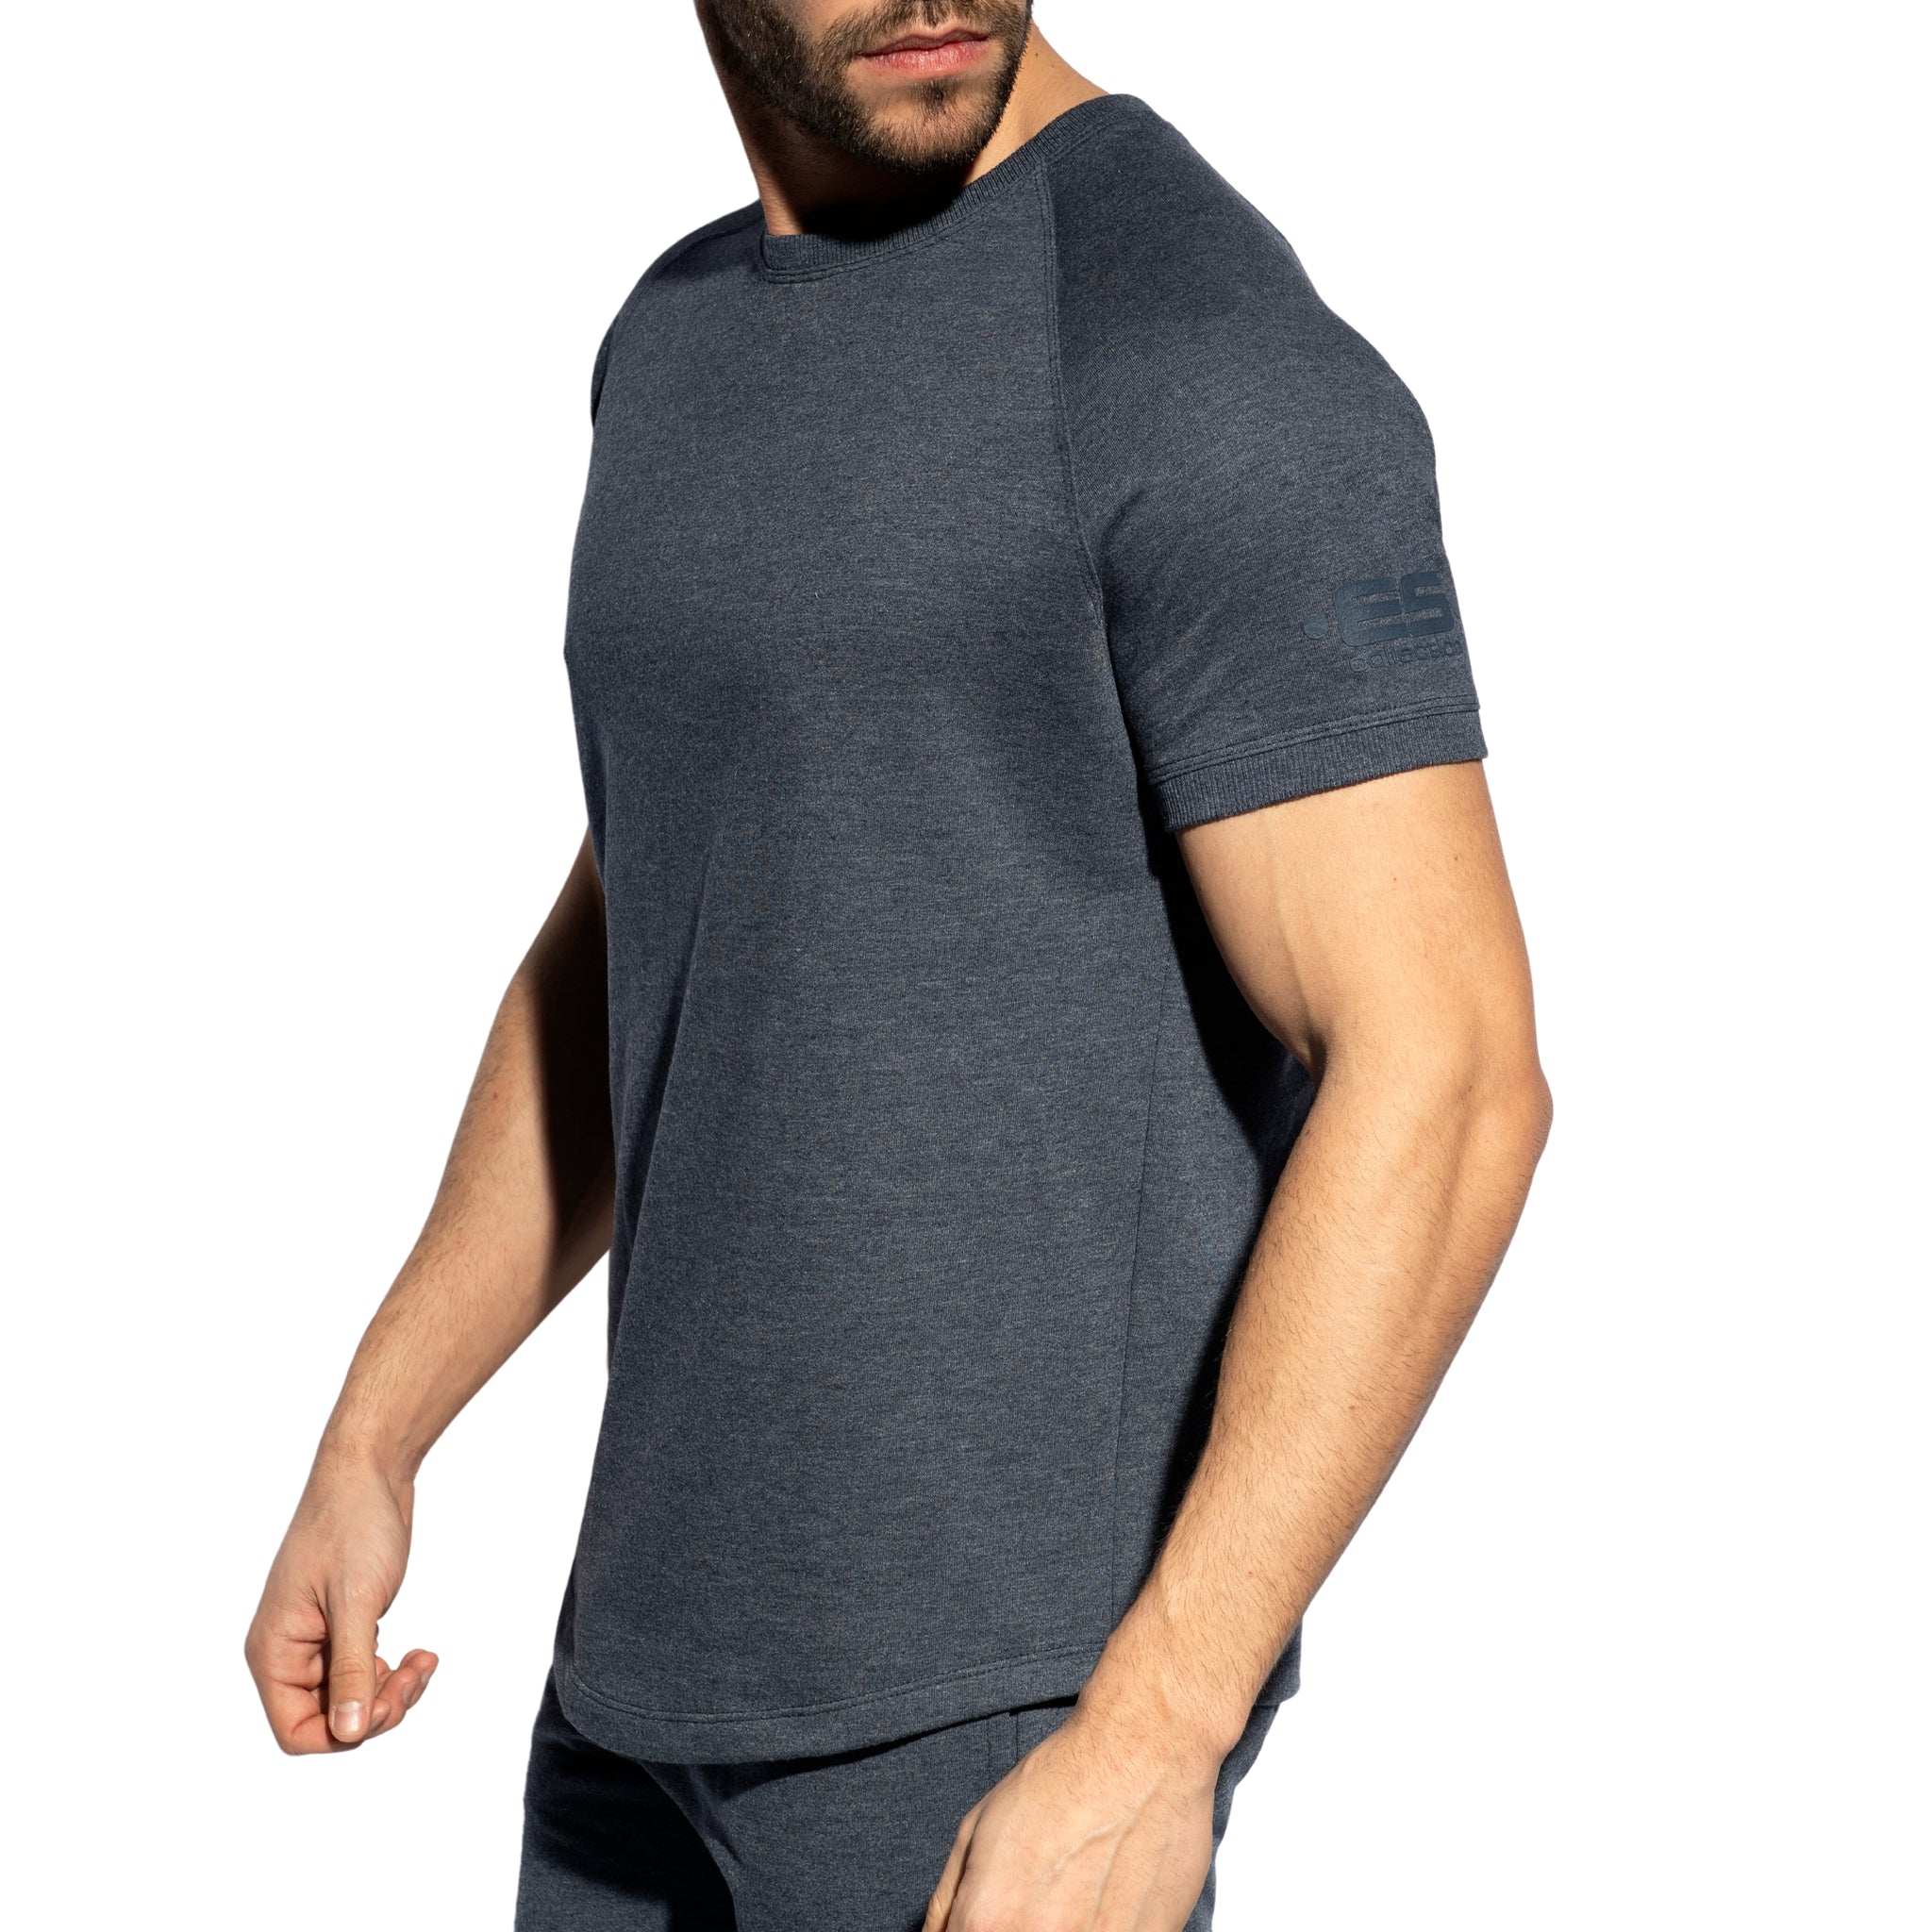 ES Collection Relief Sports T-Shirt Navy SP292